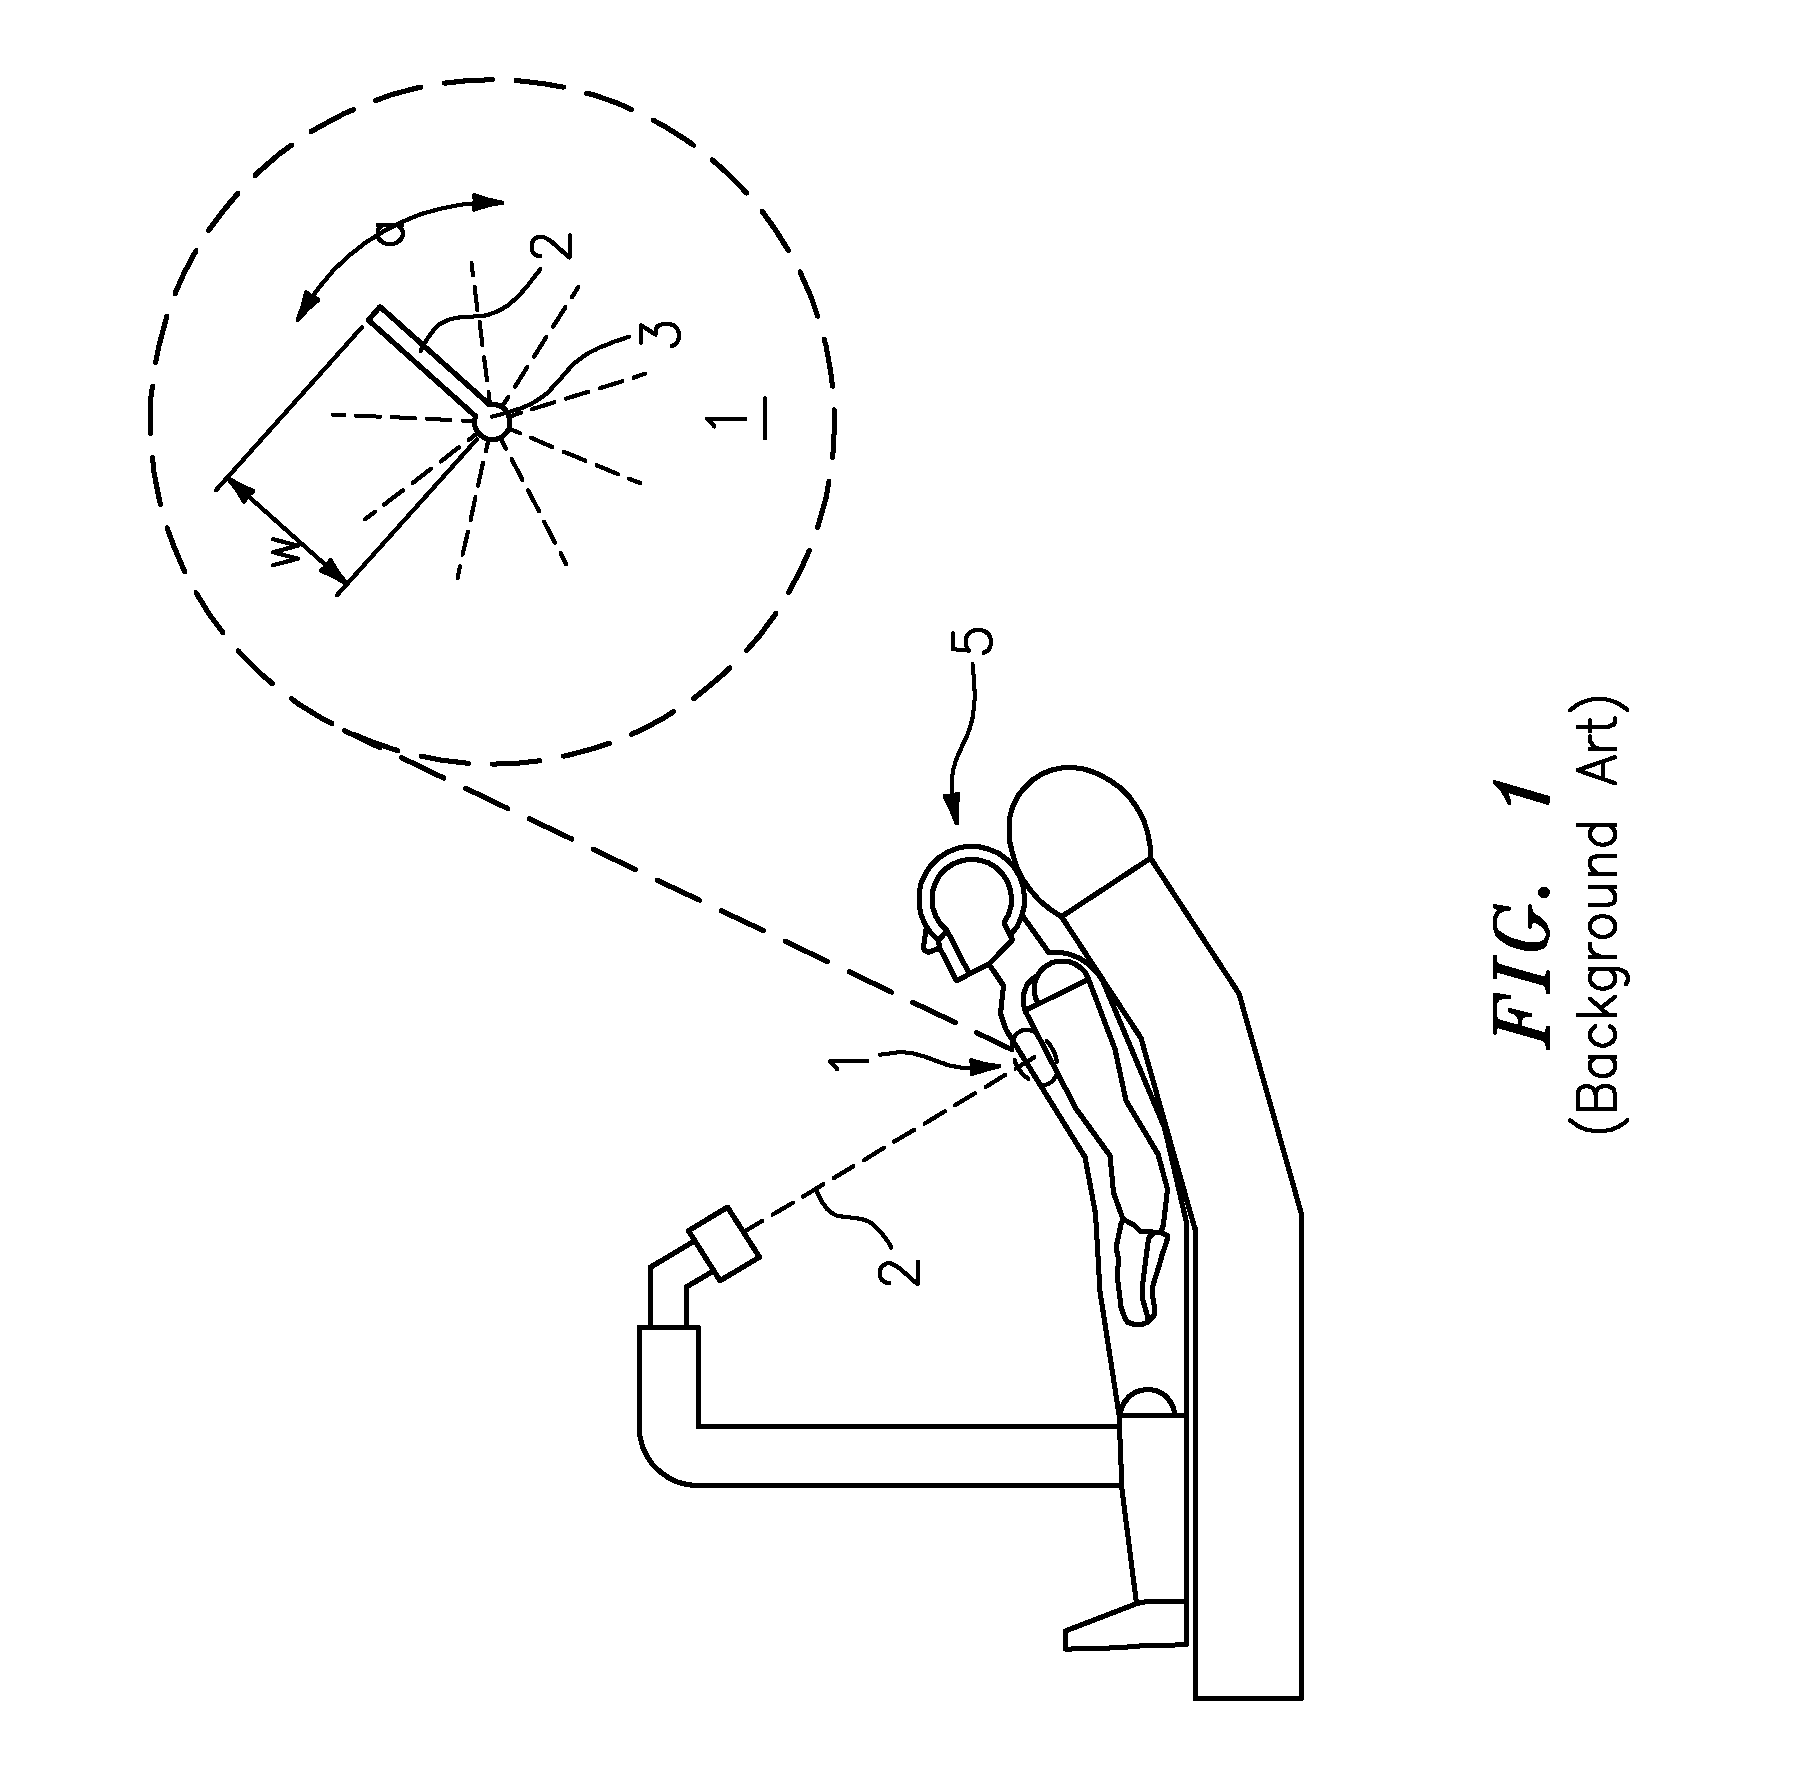 Fat reducing device and method utilizing optical emitters